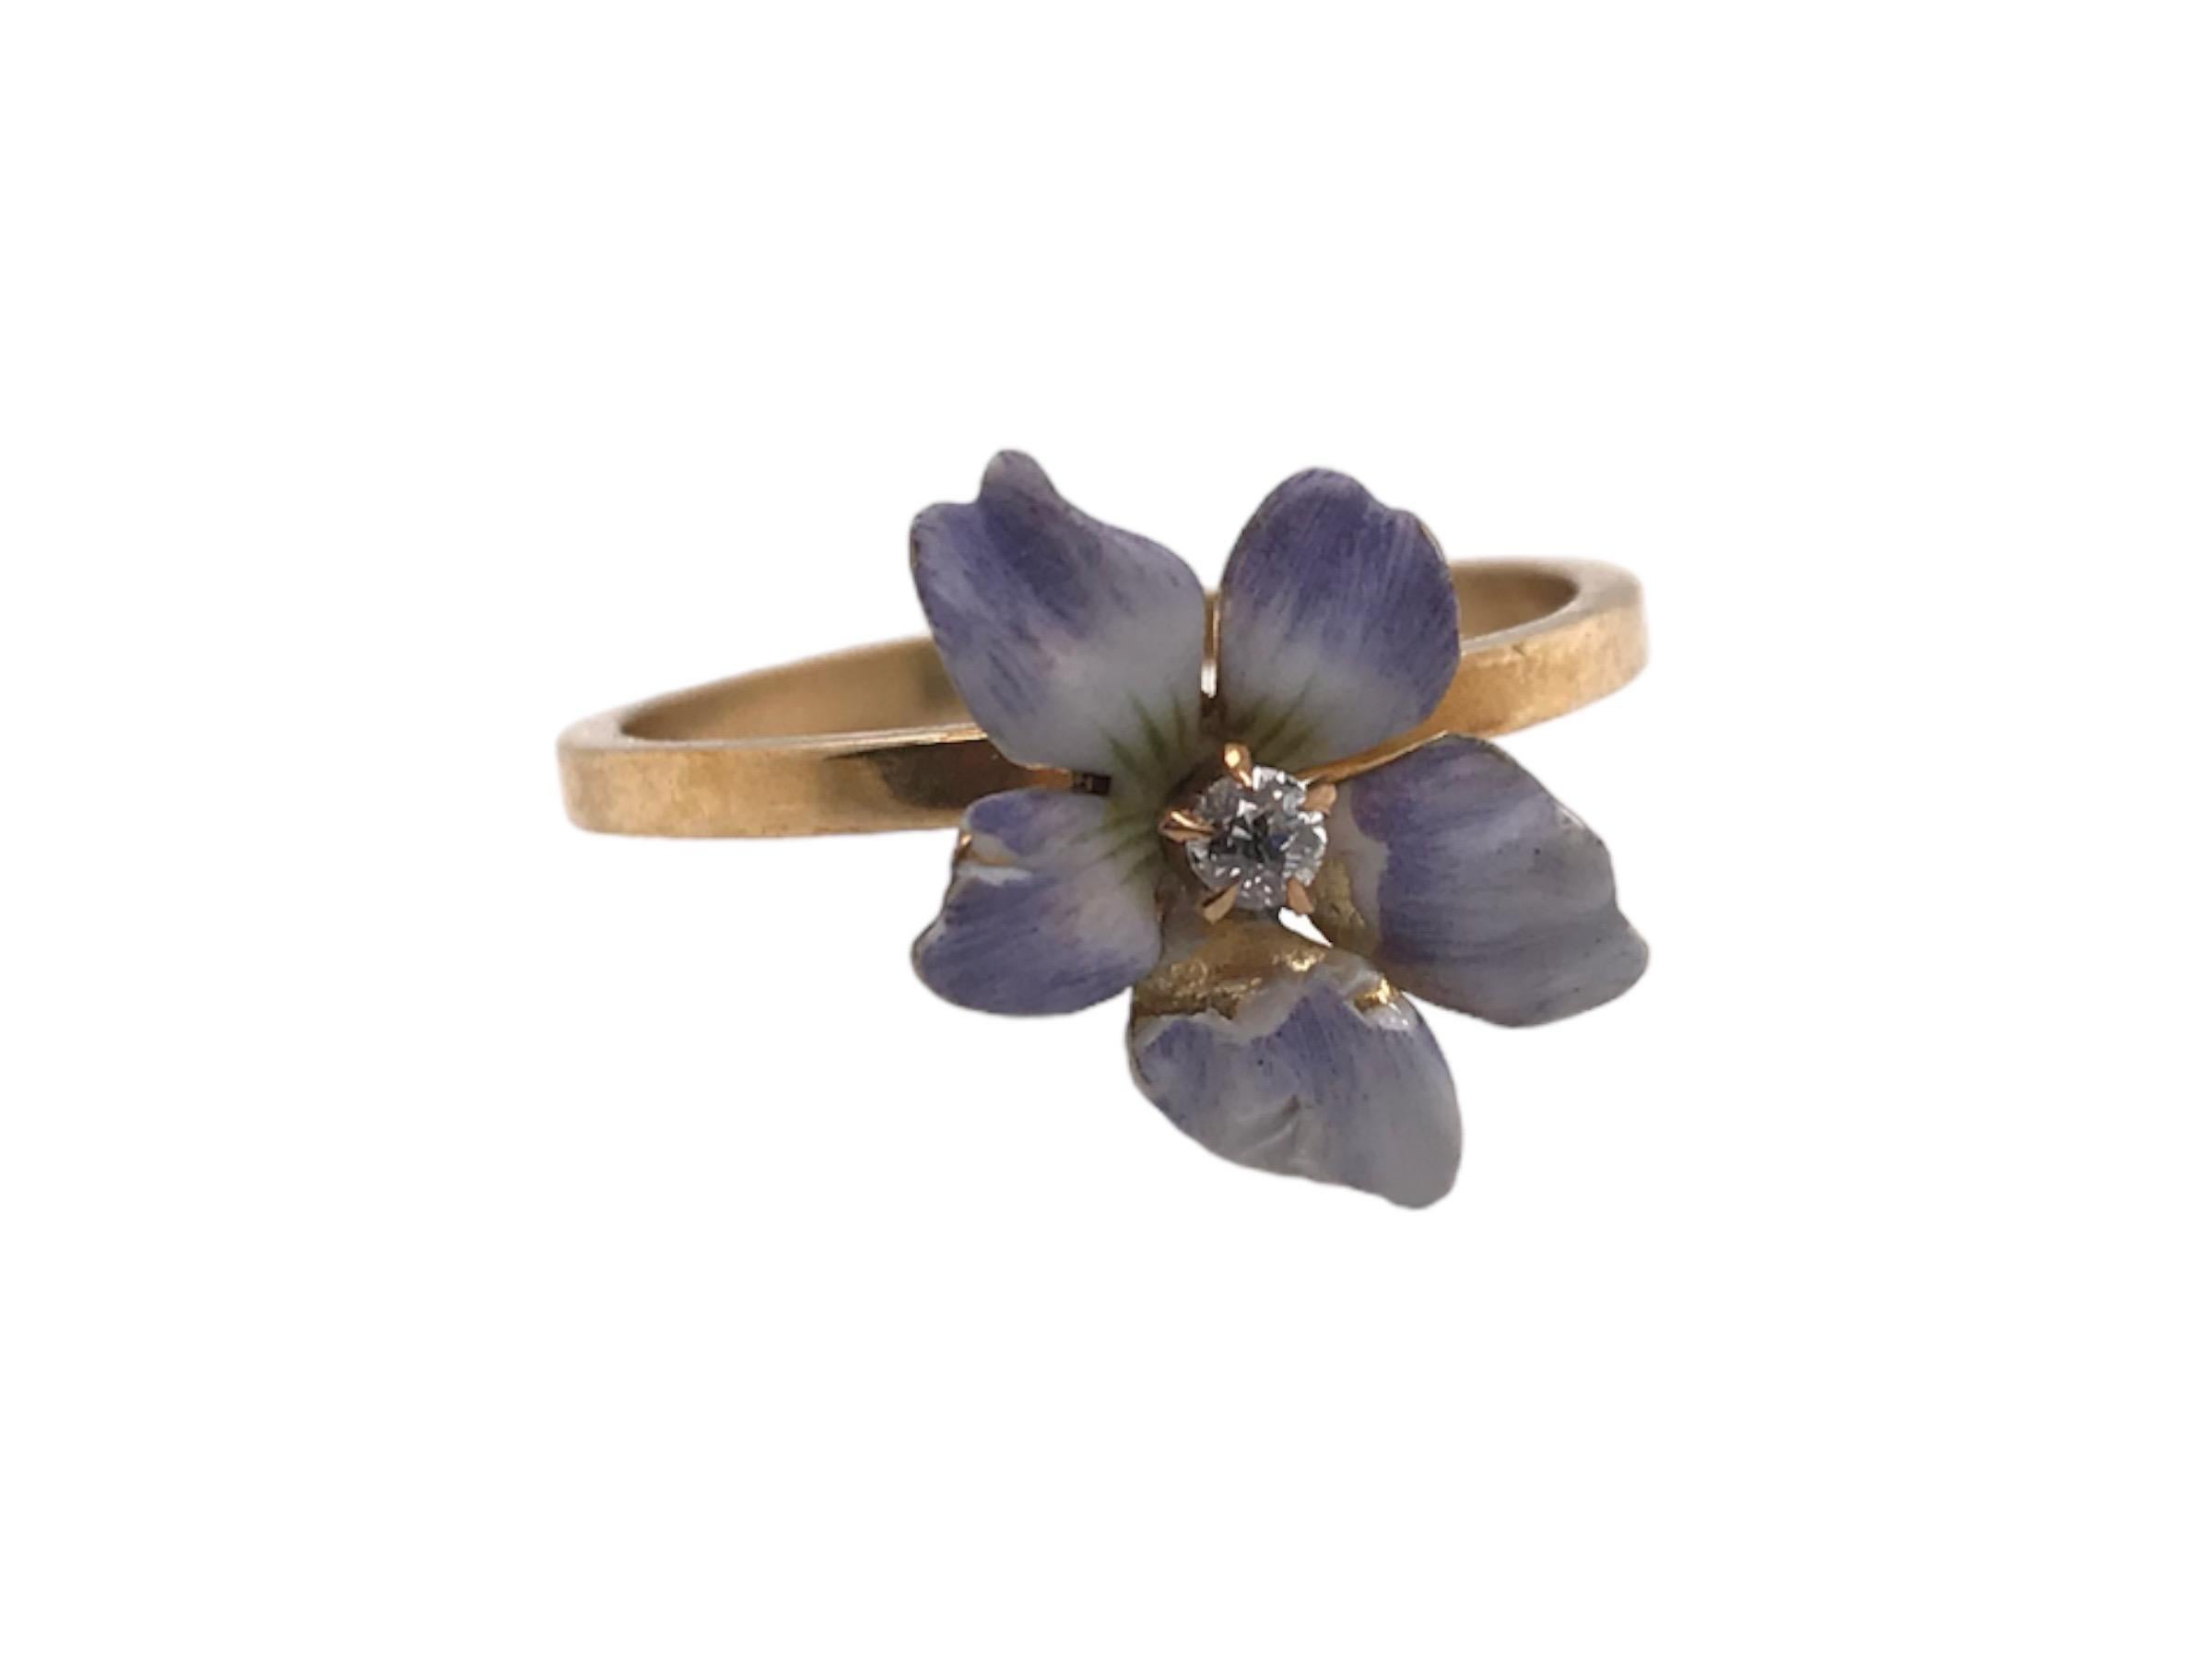 We love great conversion pieces such as this!
Originally a stick pin & repurposed into a dainty fashion ring.
This beauty features magnificent enamel work along with a tiny diamond in the center of the flower.

Metal: 10K Yellow Gold
Shank Width: